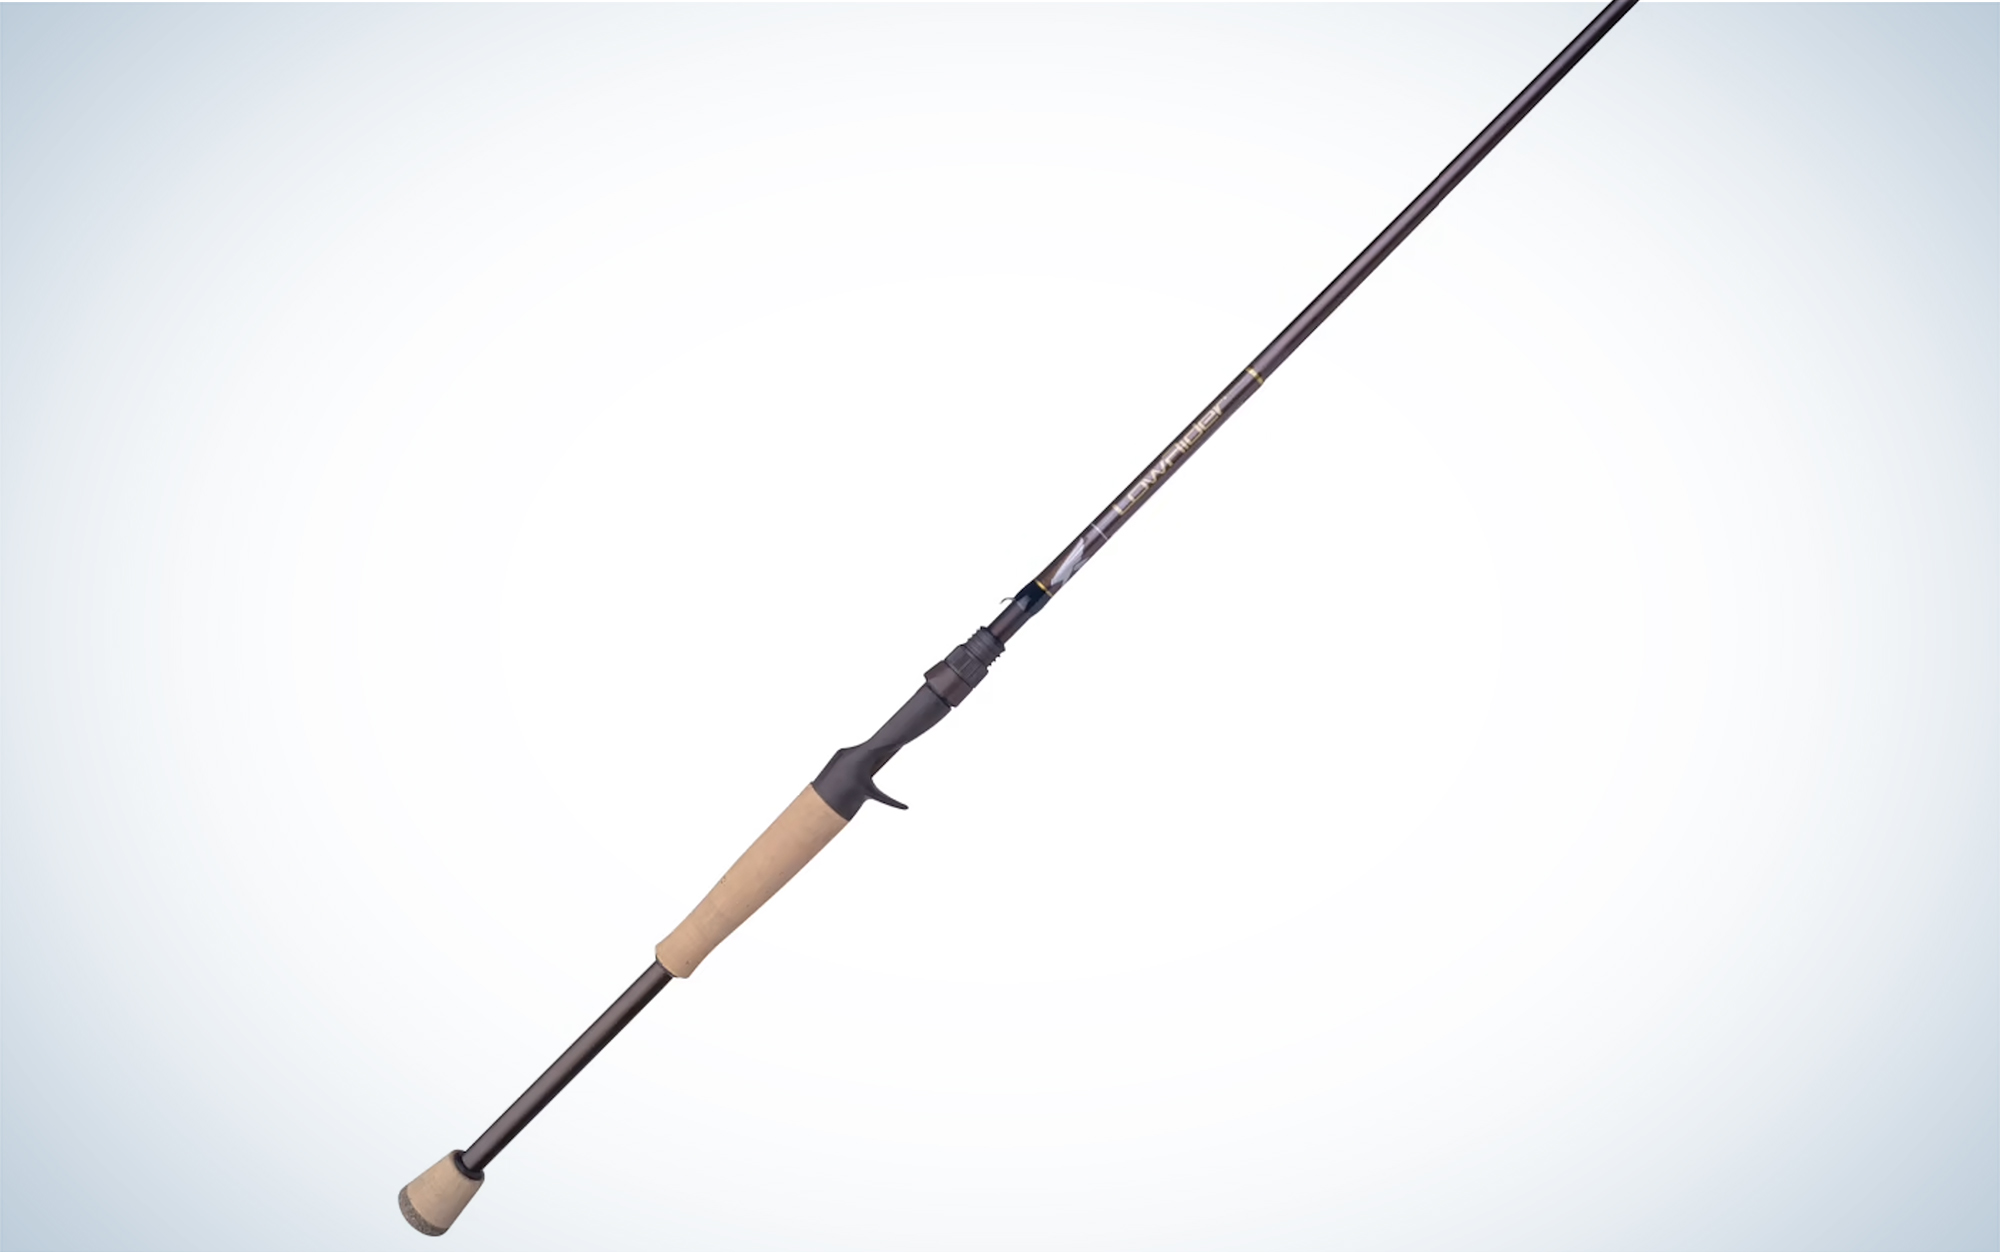 The Falcon Lowrider LFC 7-MH is the best budget rod for worms and jigs while bass fishing.